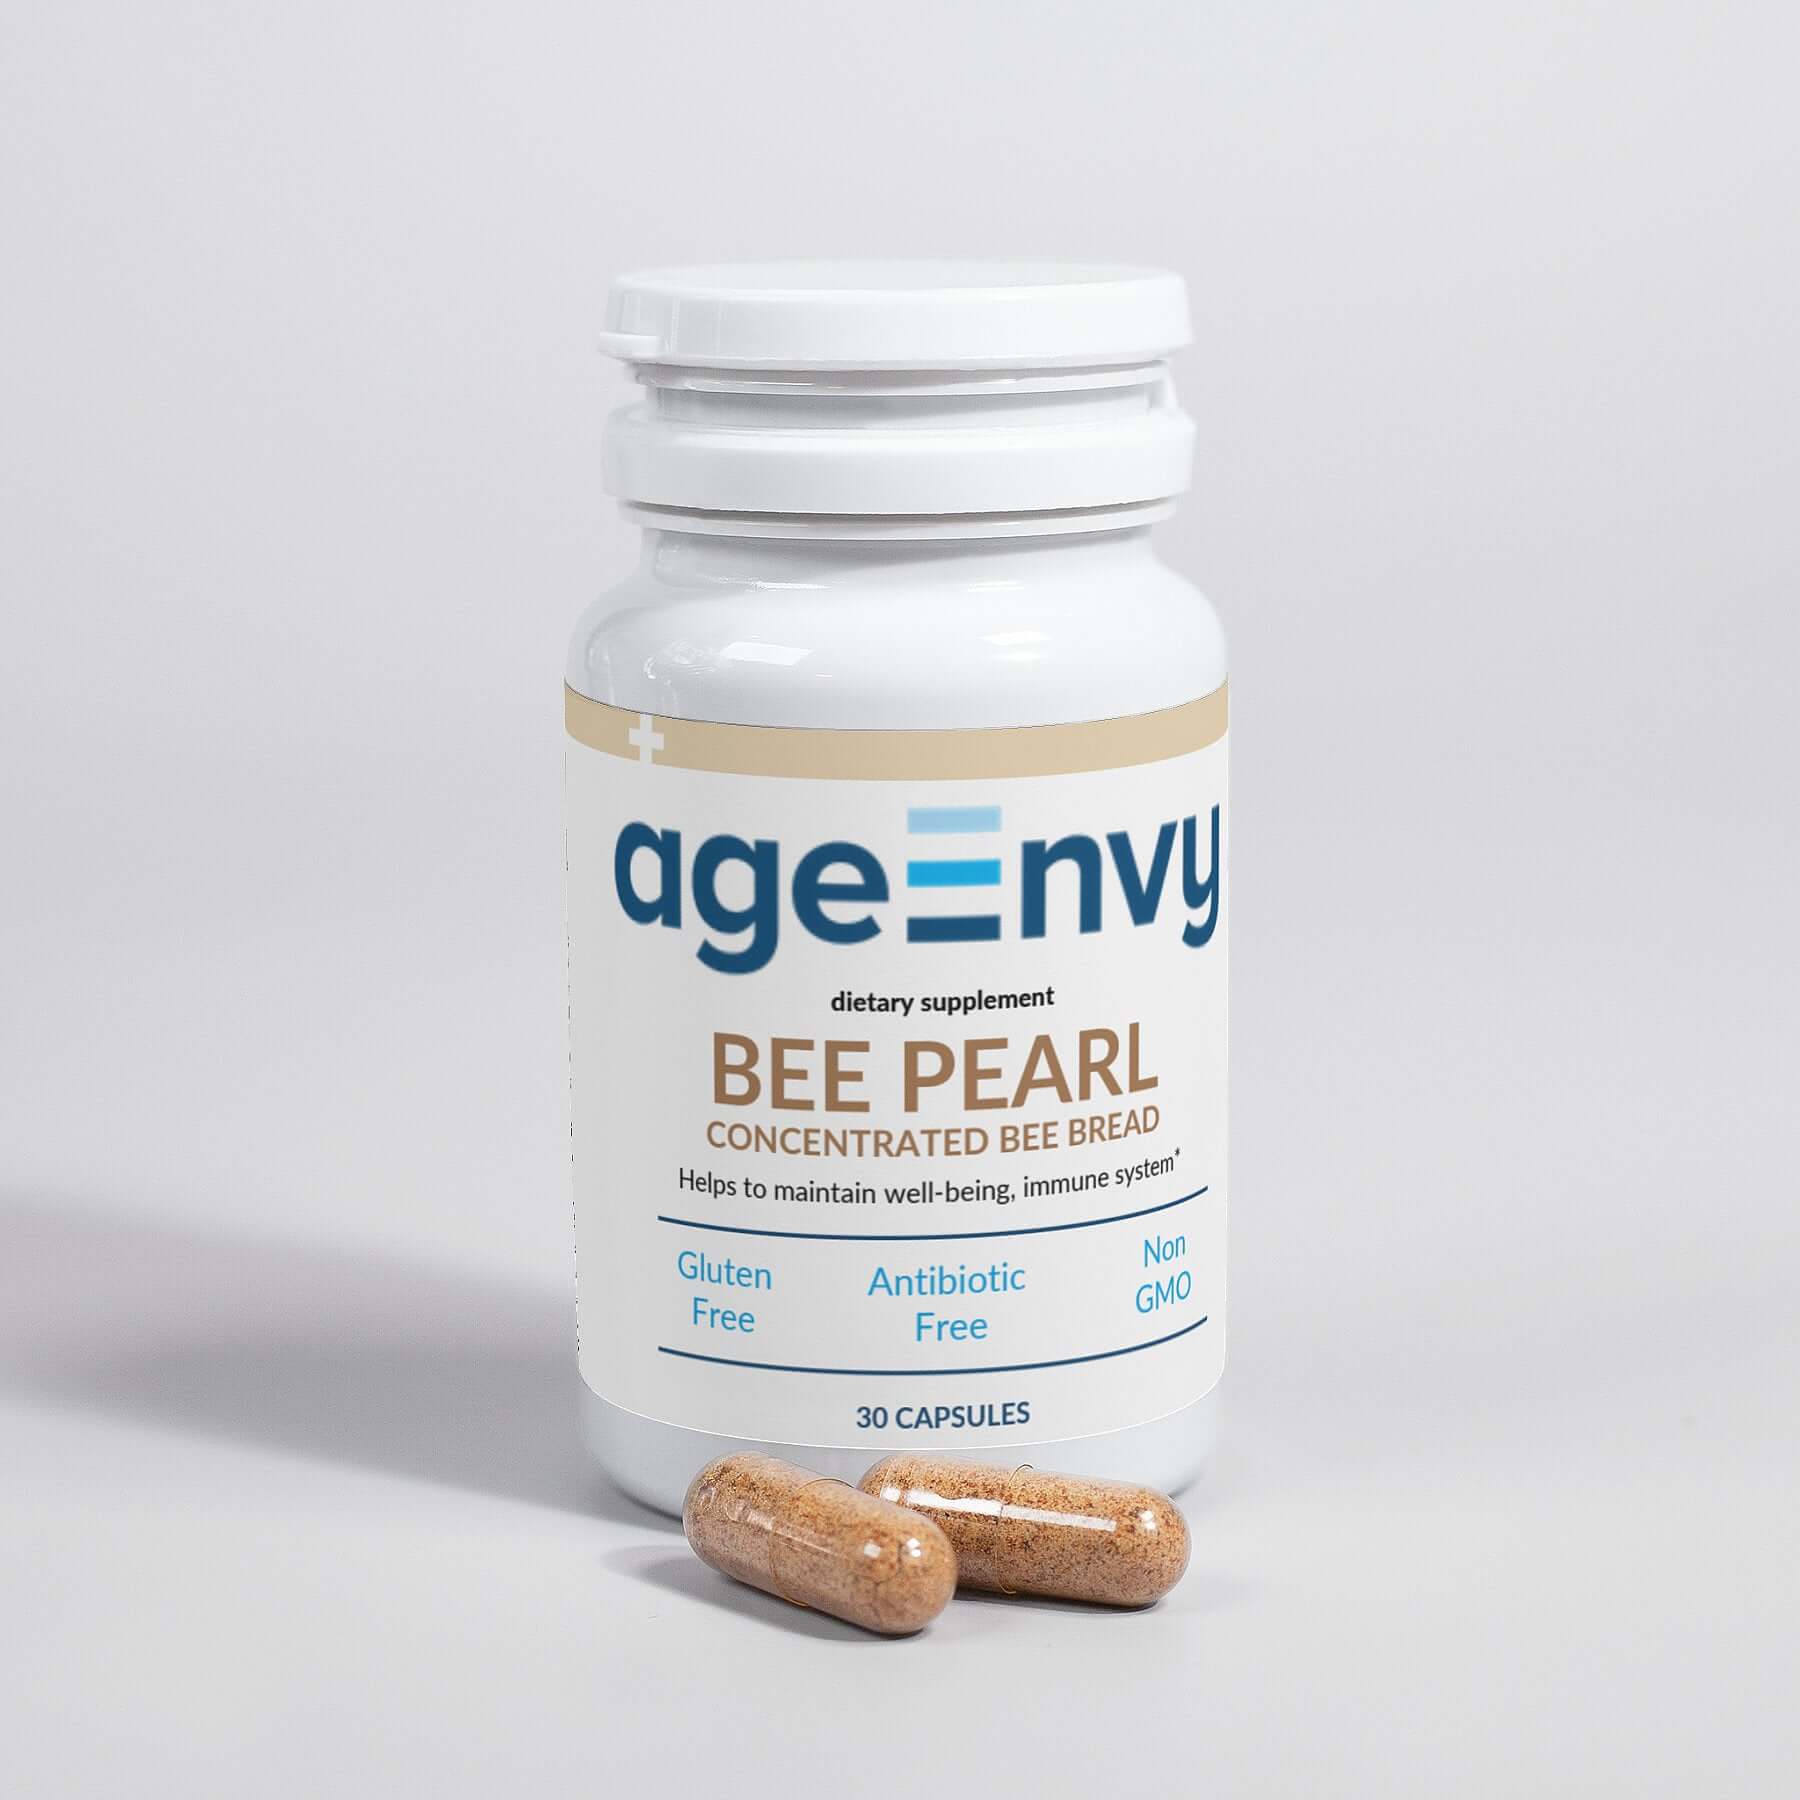 Bee Pearl Bee Bread (30 Caps) by AgeEnvy